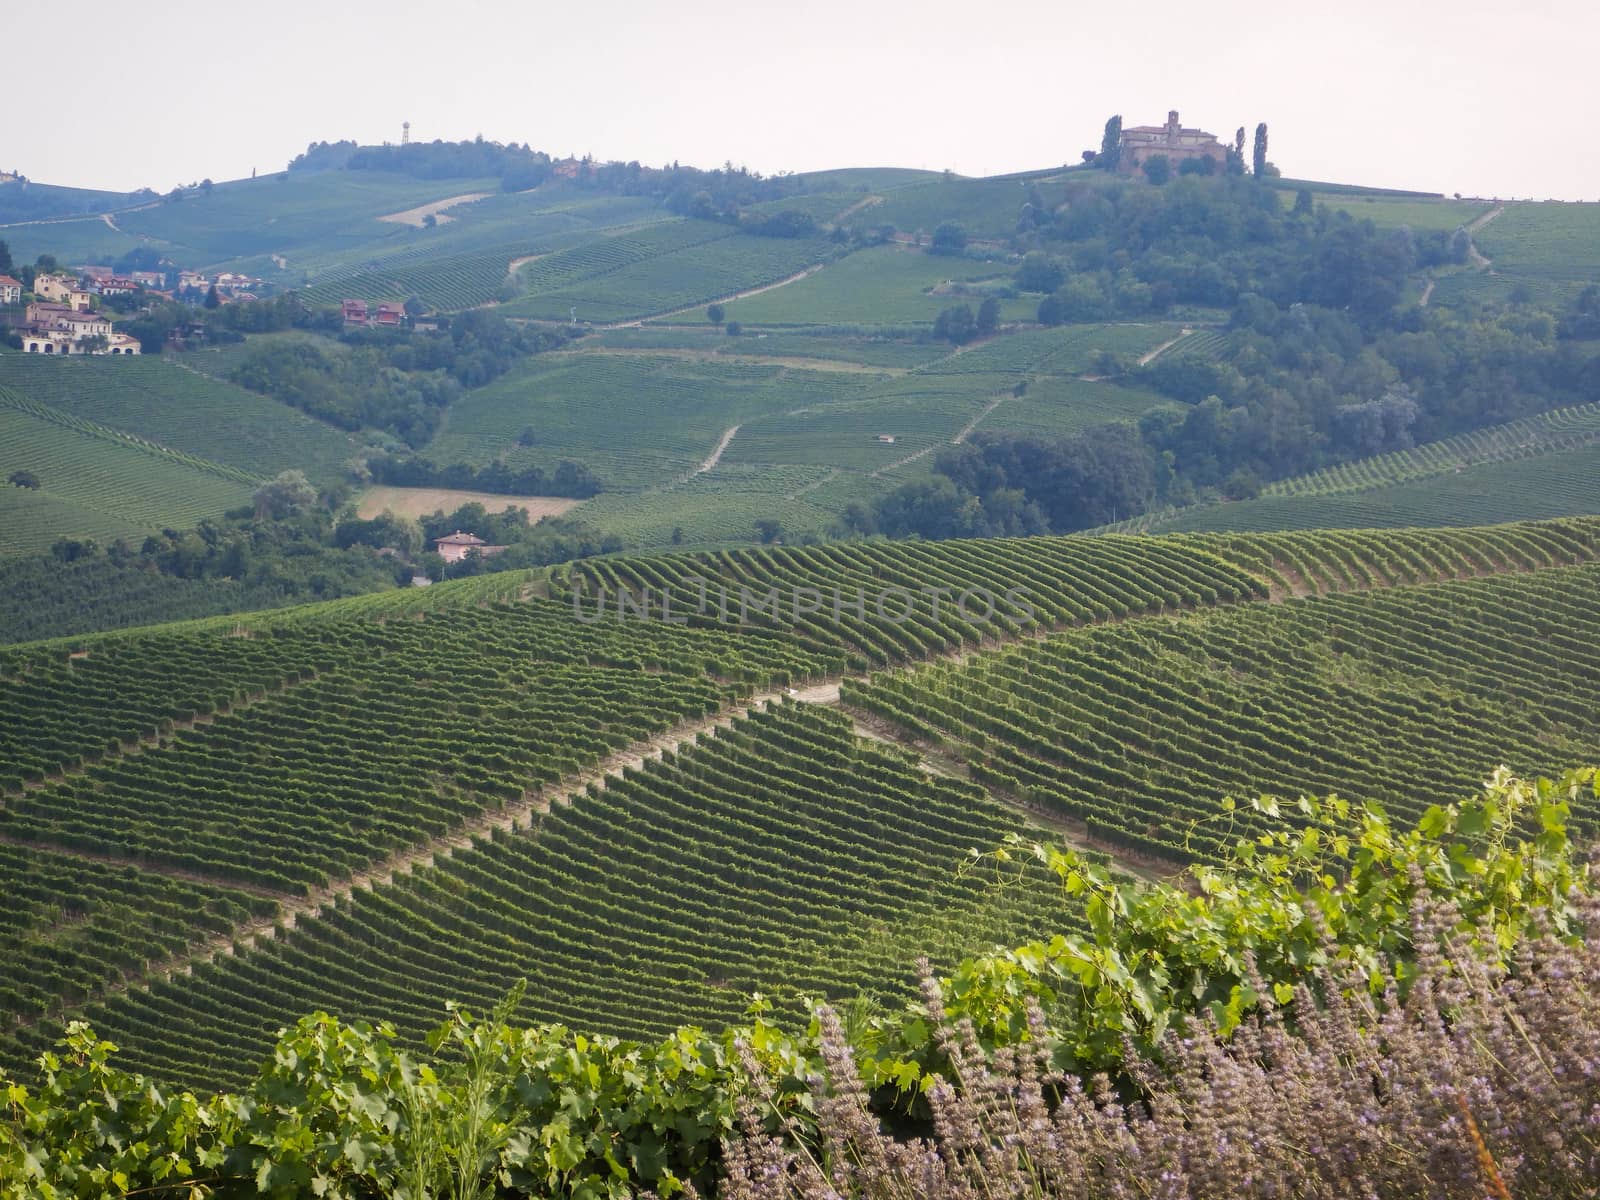 A view of country side near Barolo, Piedmont - Italy